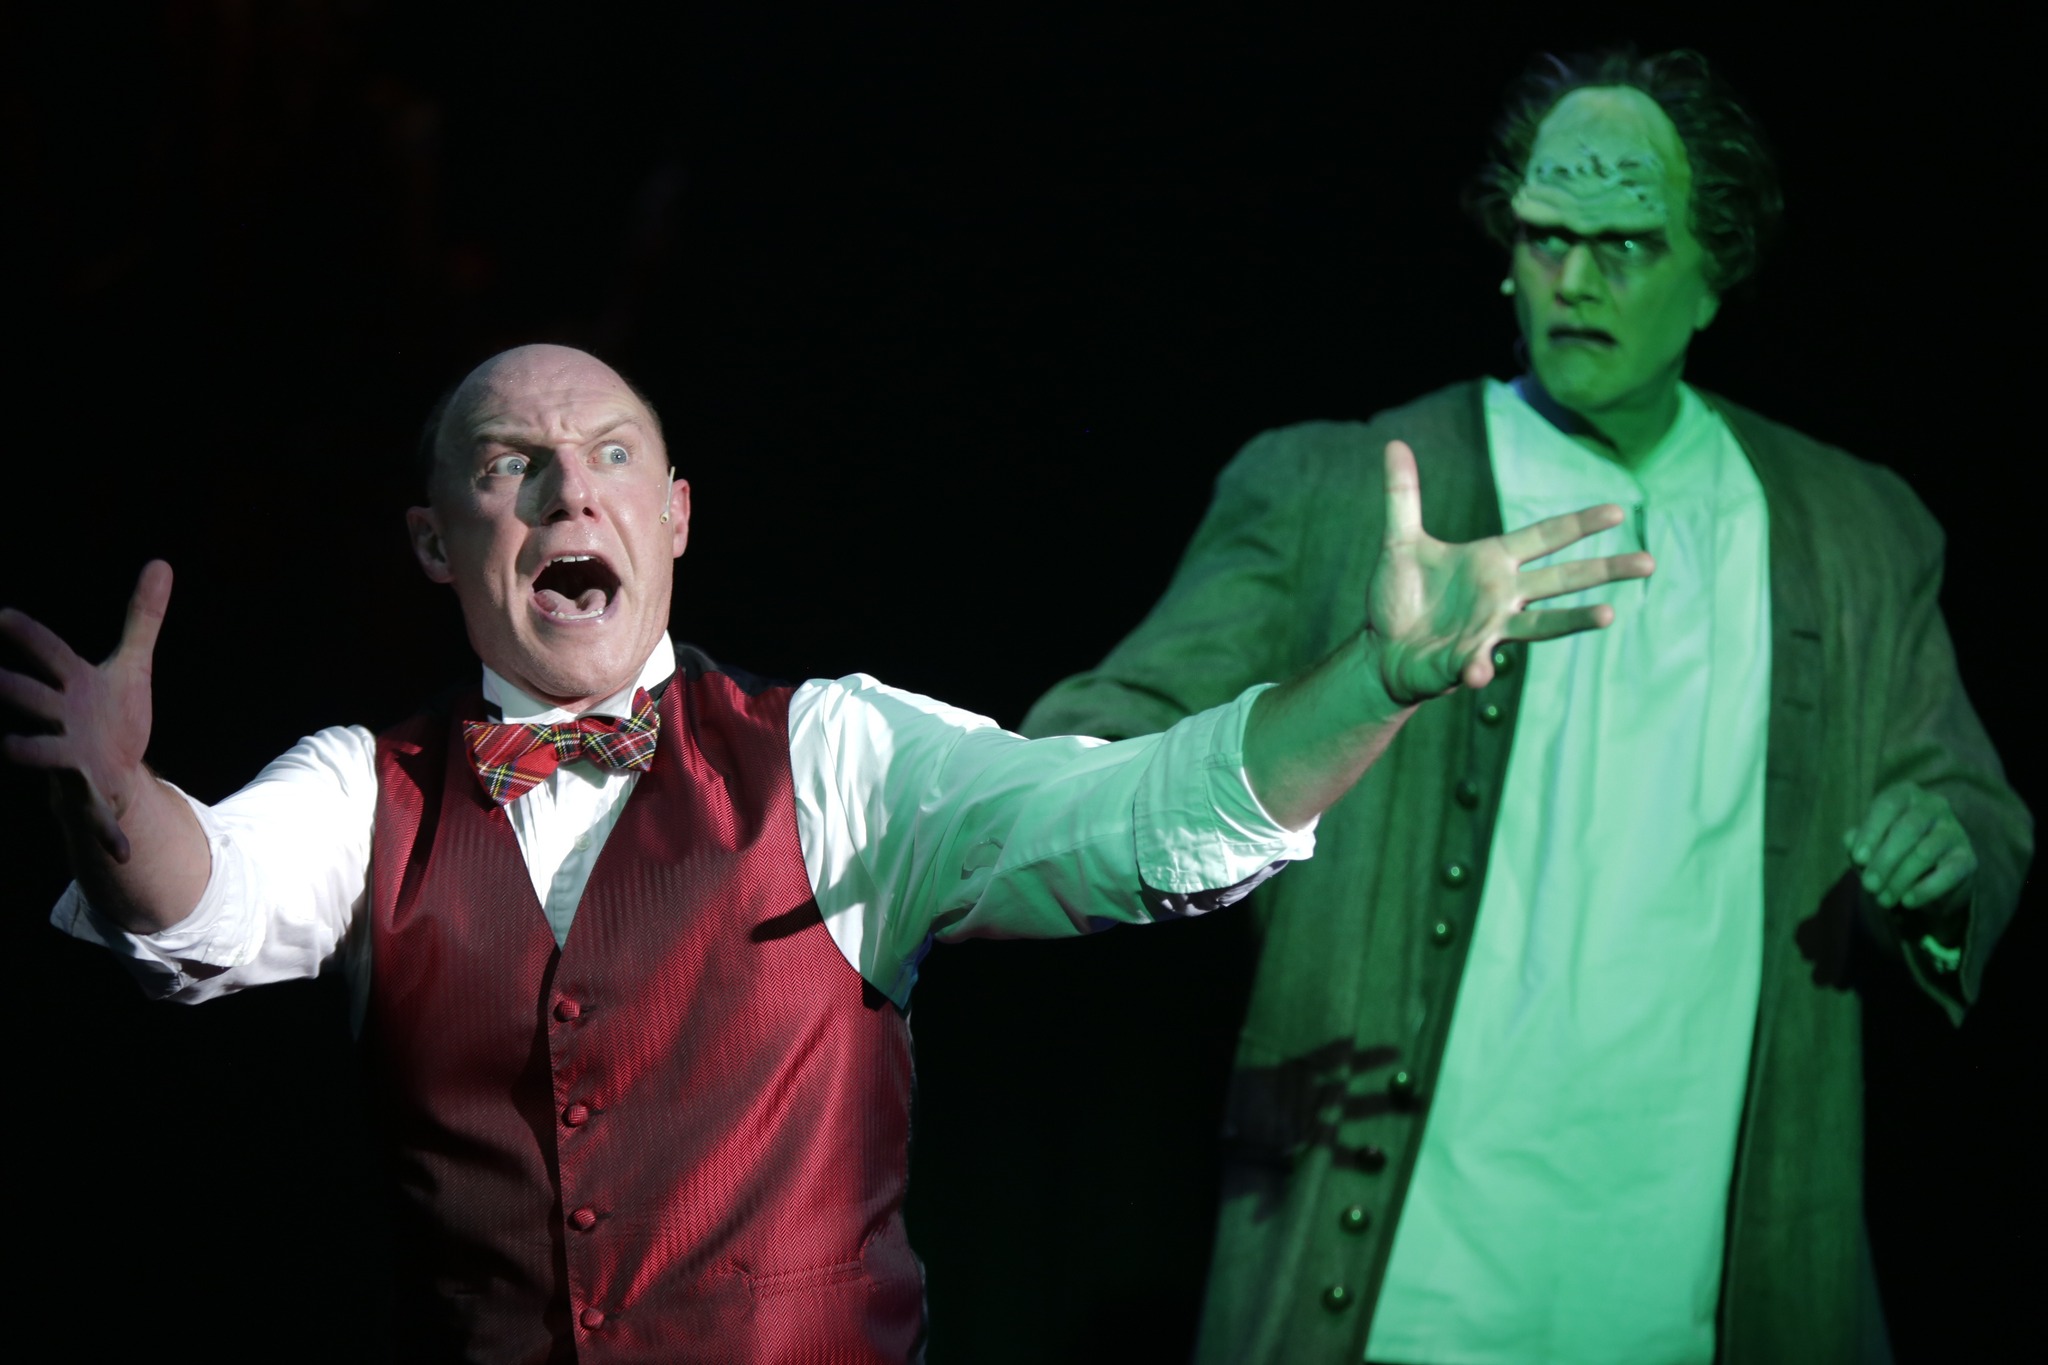 High Street’s frightfully funny musical tale